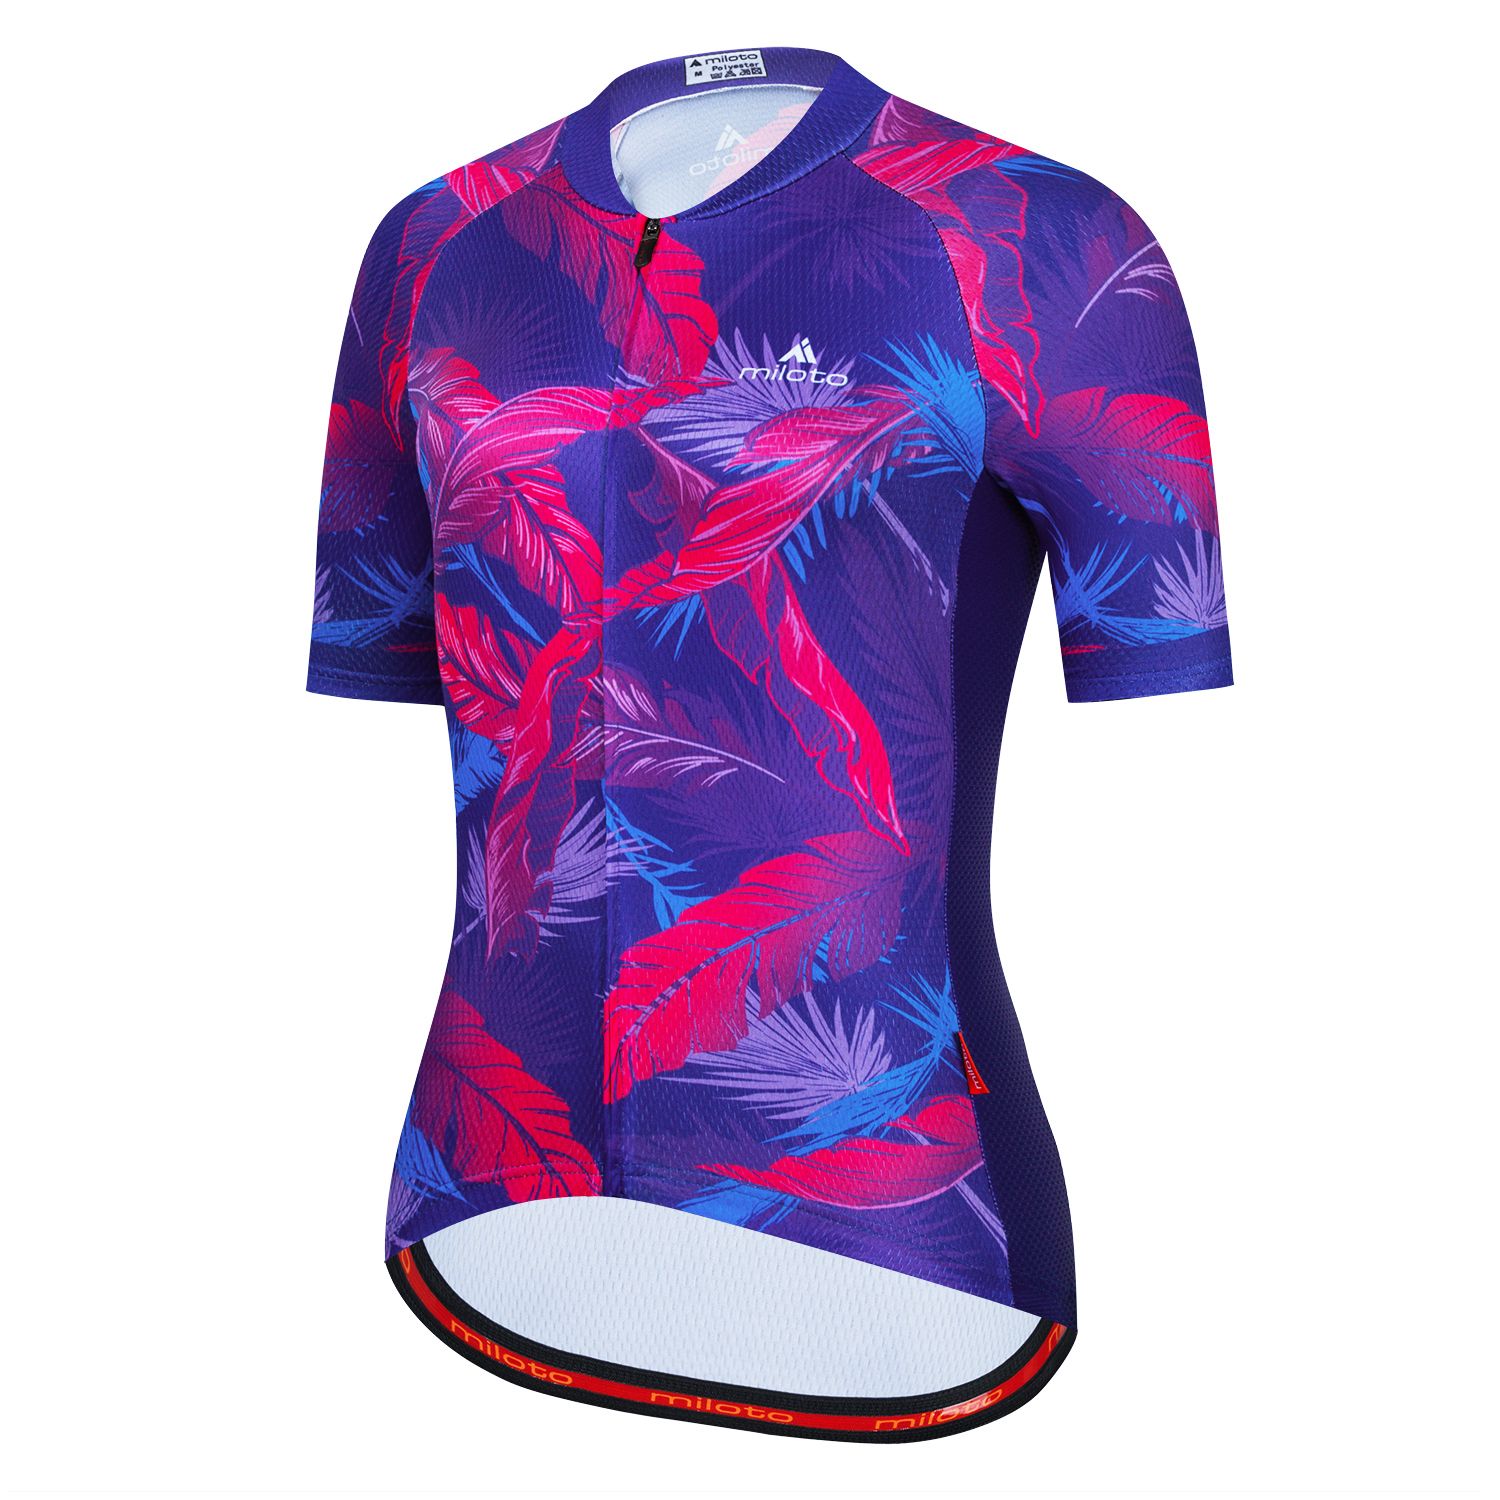 Maillot court